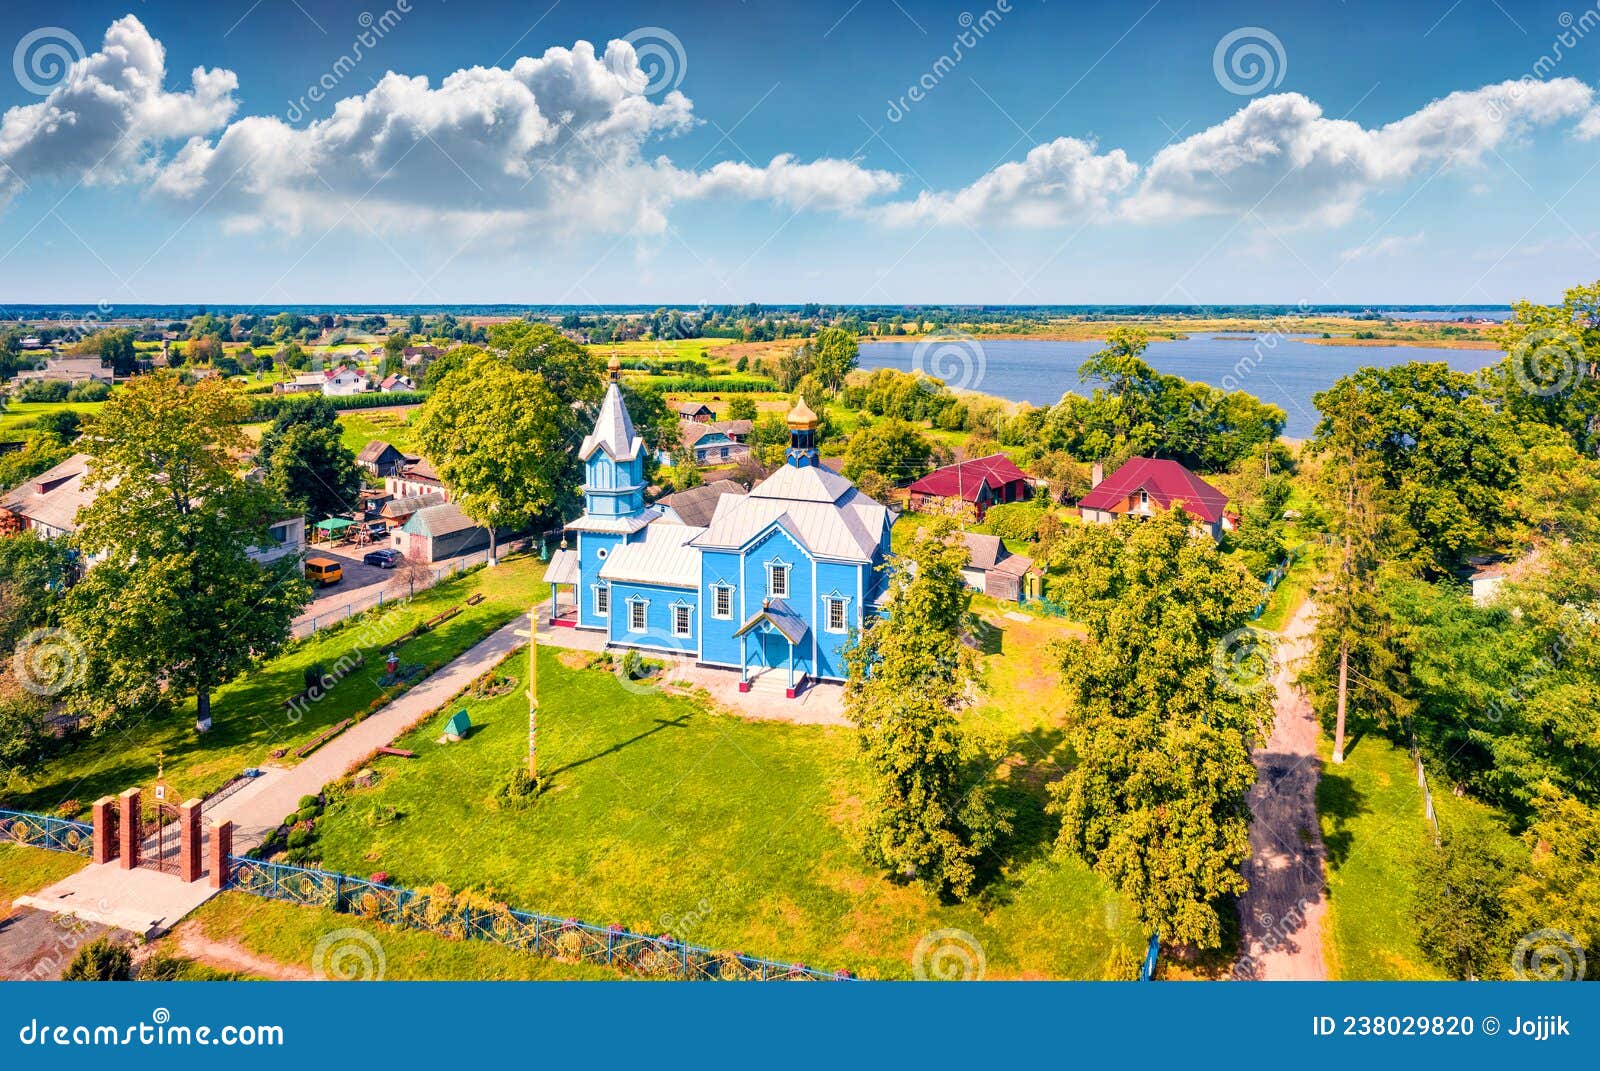 sunny summer view from flying drone of svyato-symeonivsÃÂ¹ka church,